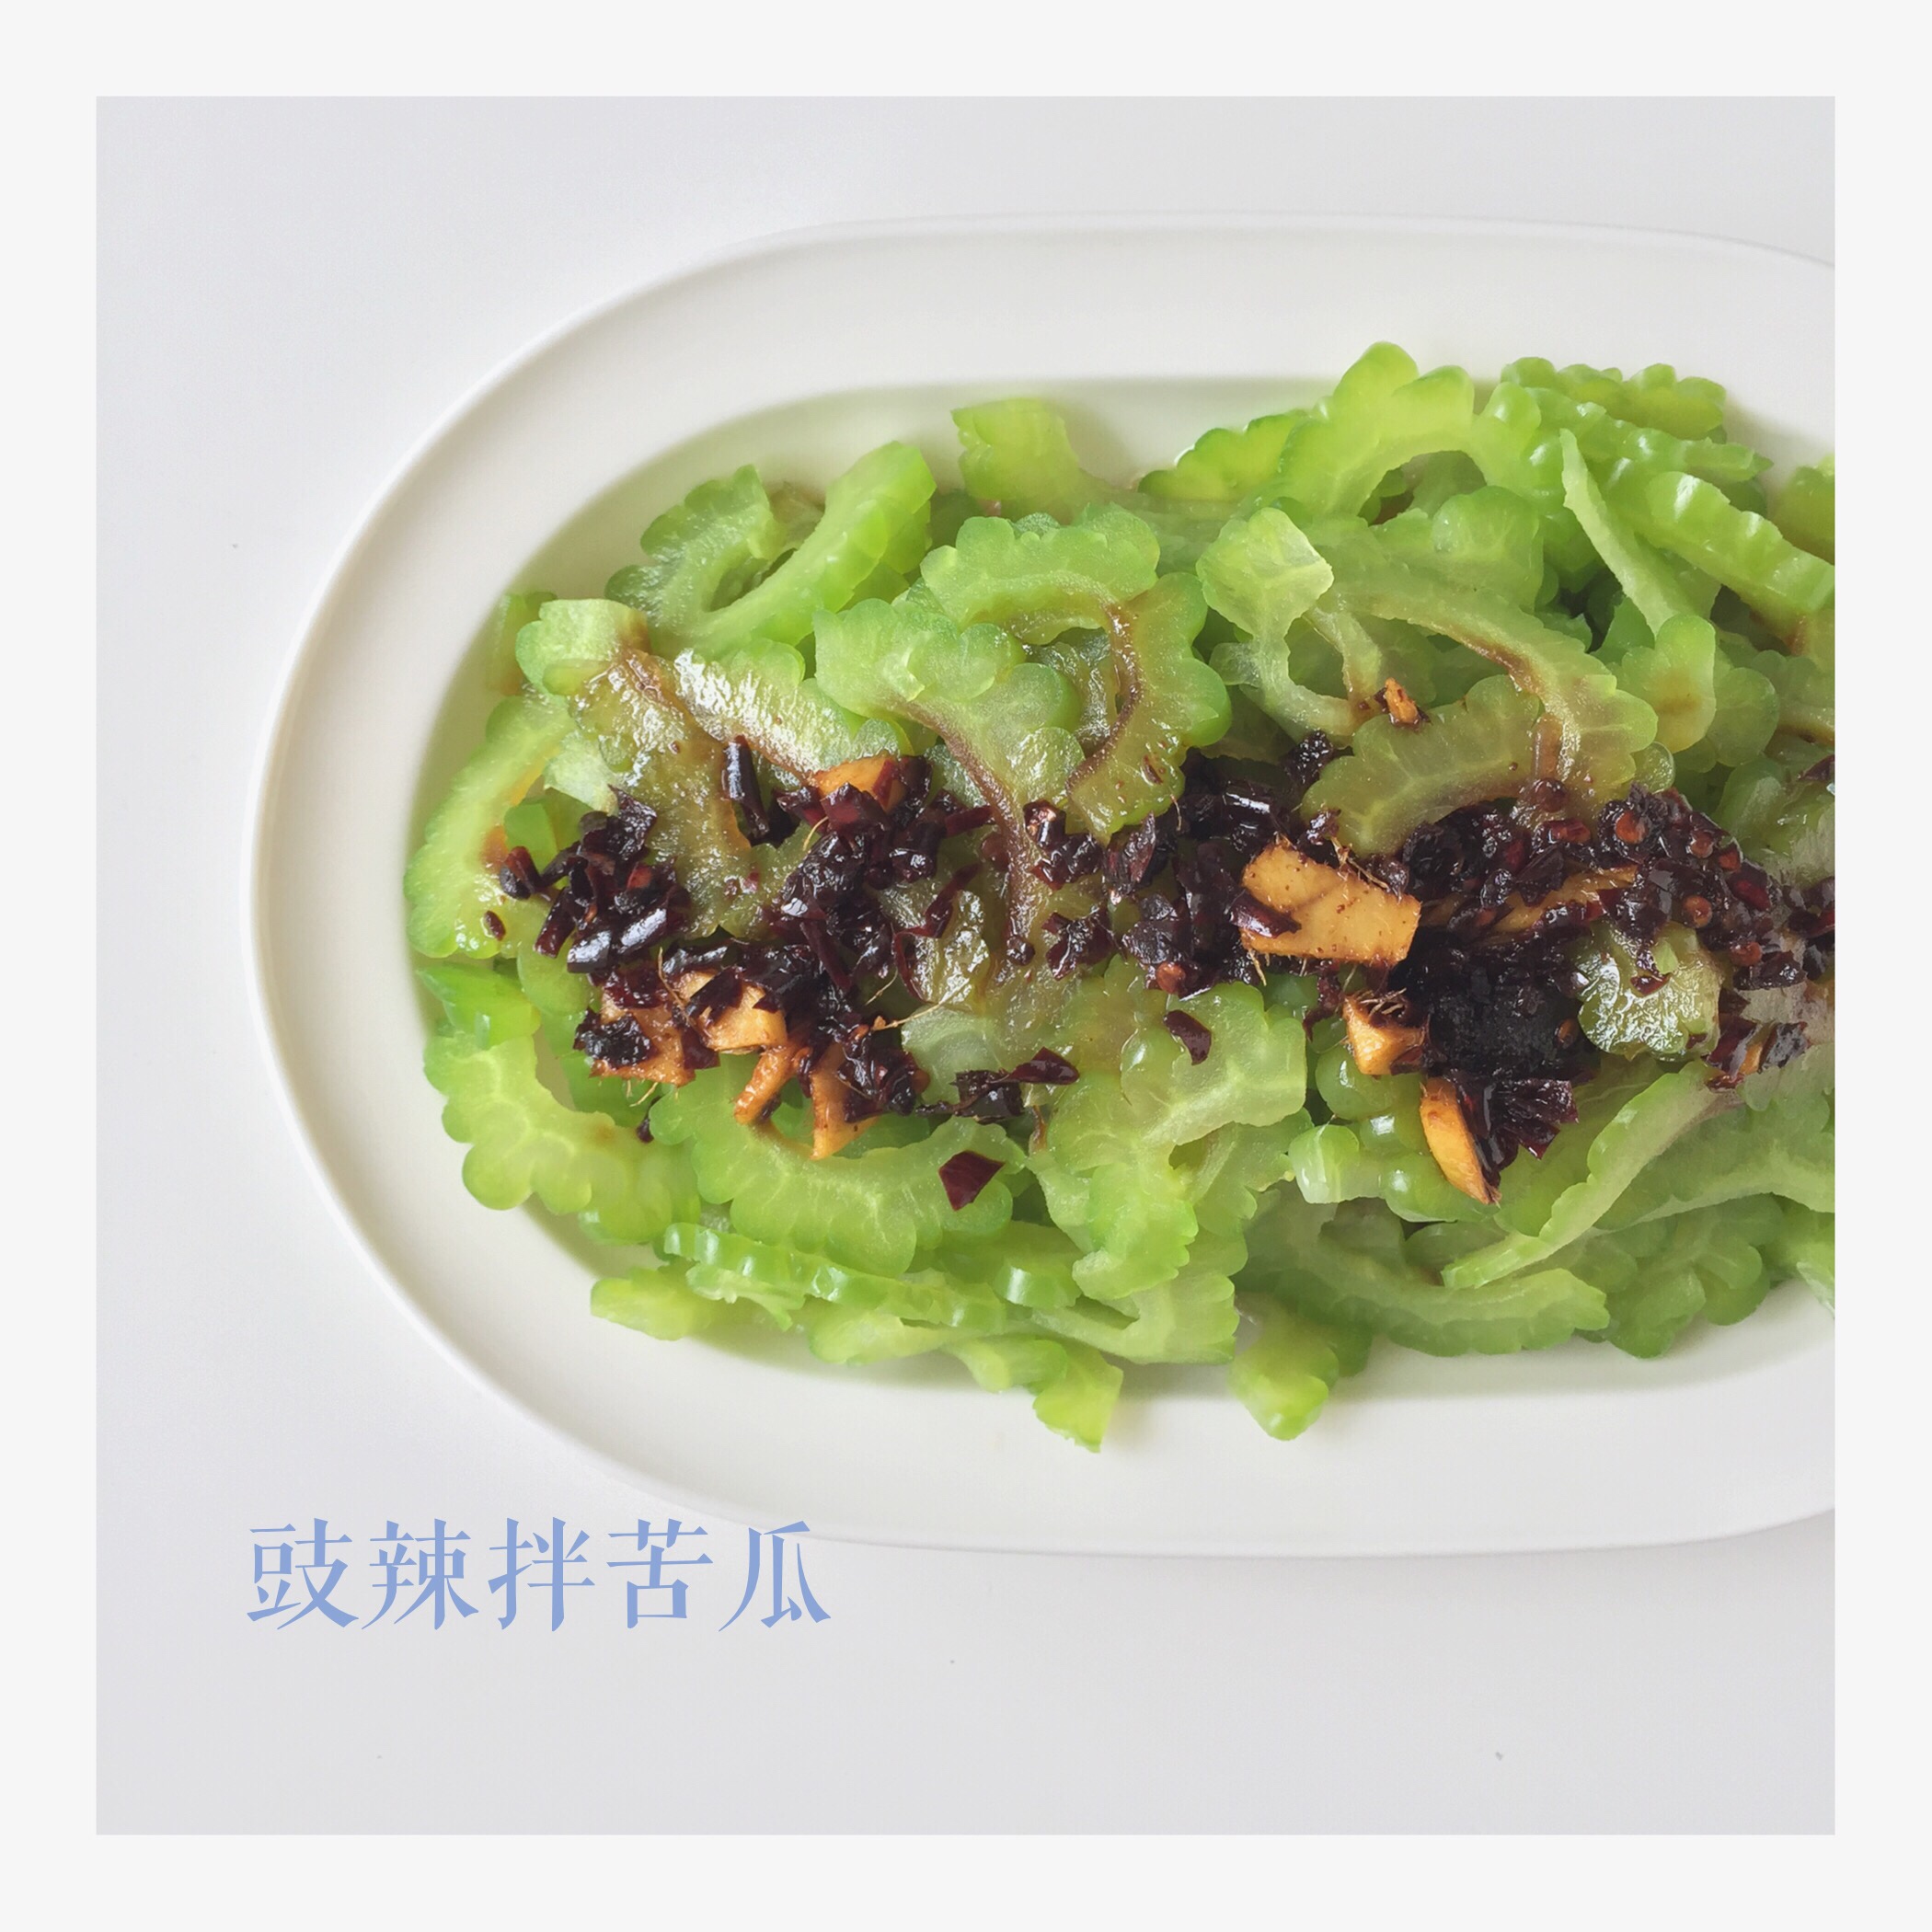 
Chi is hot mix the practice of balsam pear, chi is hot mix how is balsam pear done delicious